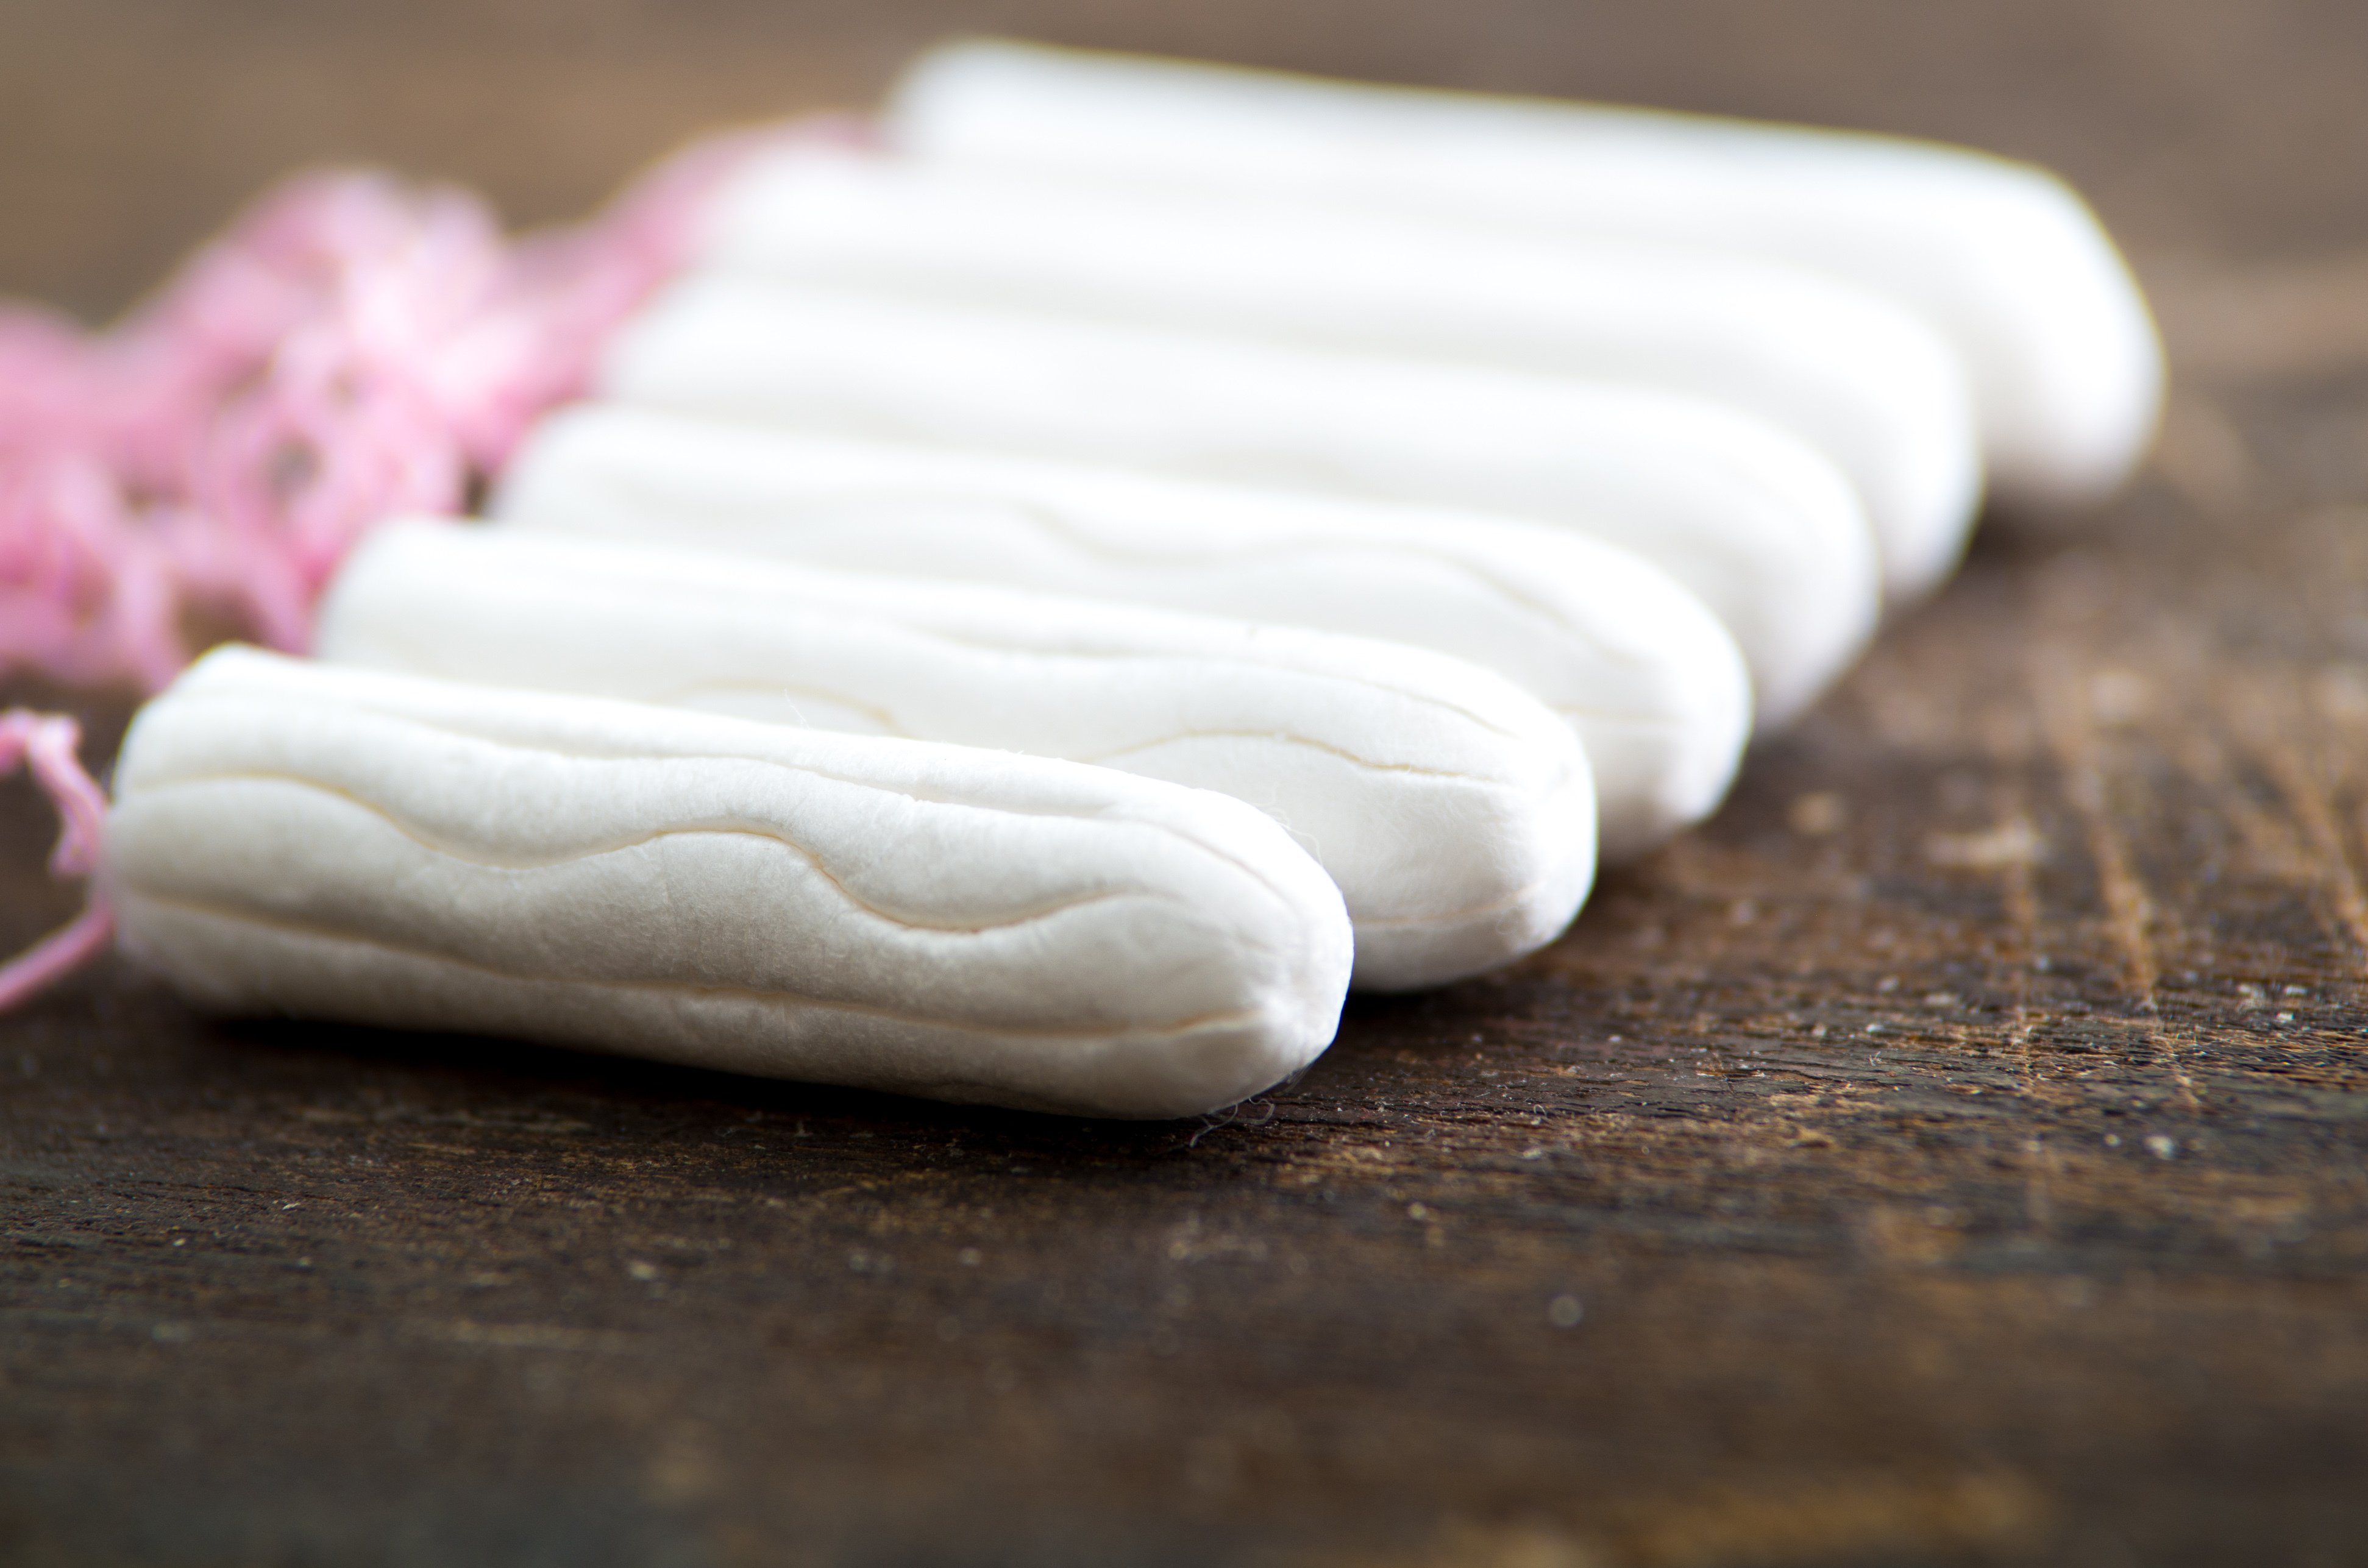 A set of sanitary tampons on the table. | Source: Shutterstock